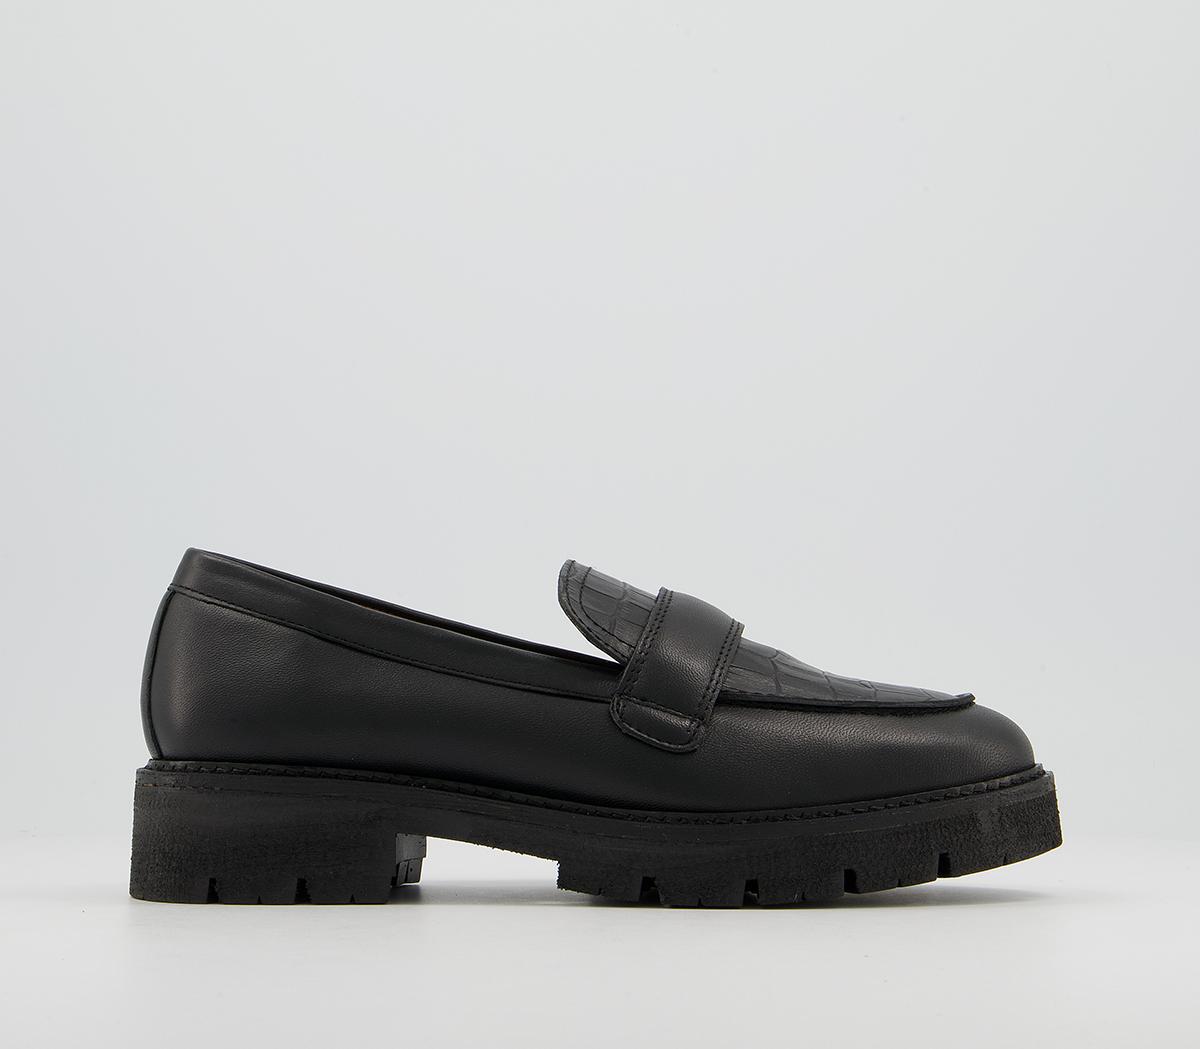 OfficeFrill Chunky Padded Loafer ShoesBlack Leather Croc Mix